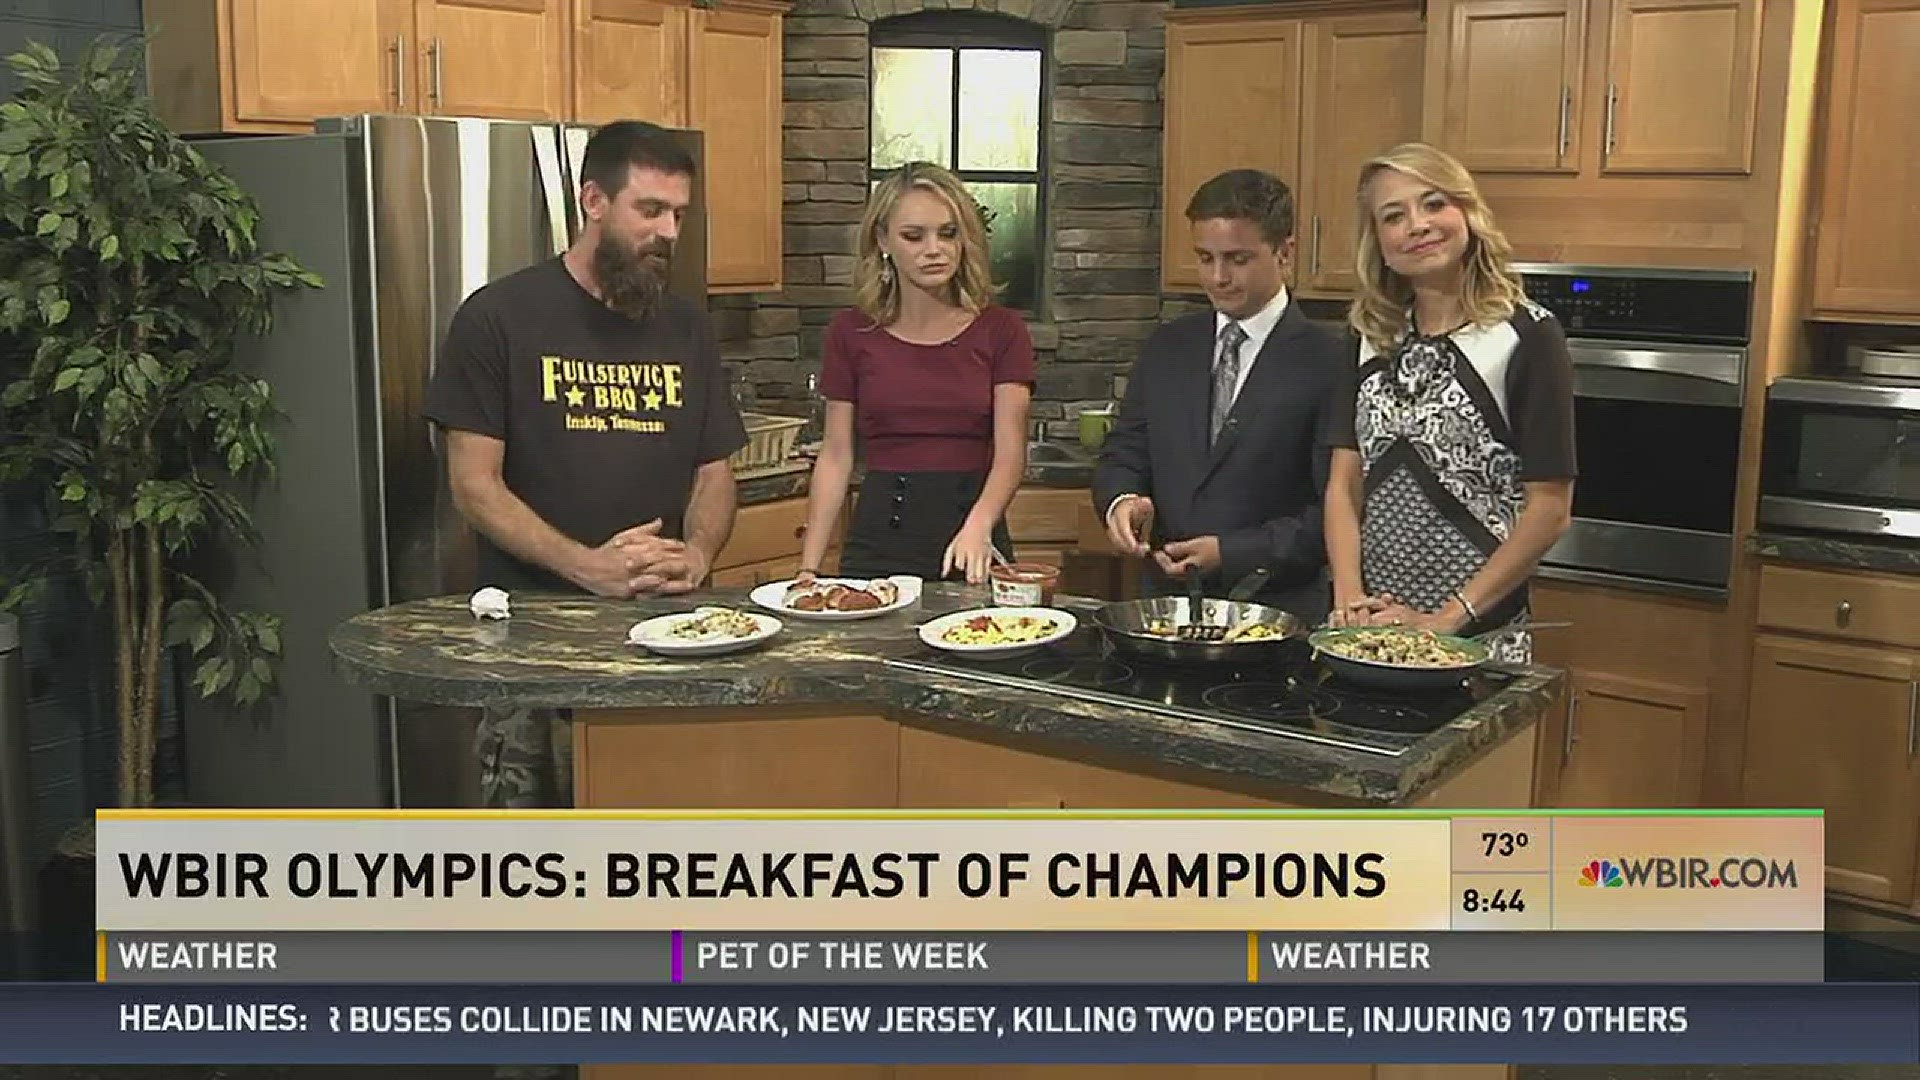 Daniel Sechtin, Brittany Bade, and Rebecca Sweet all compete to see who can make the best breakfast.